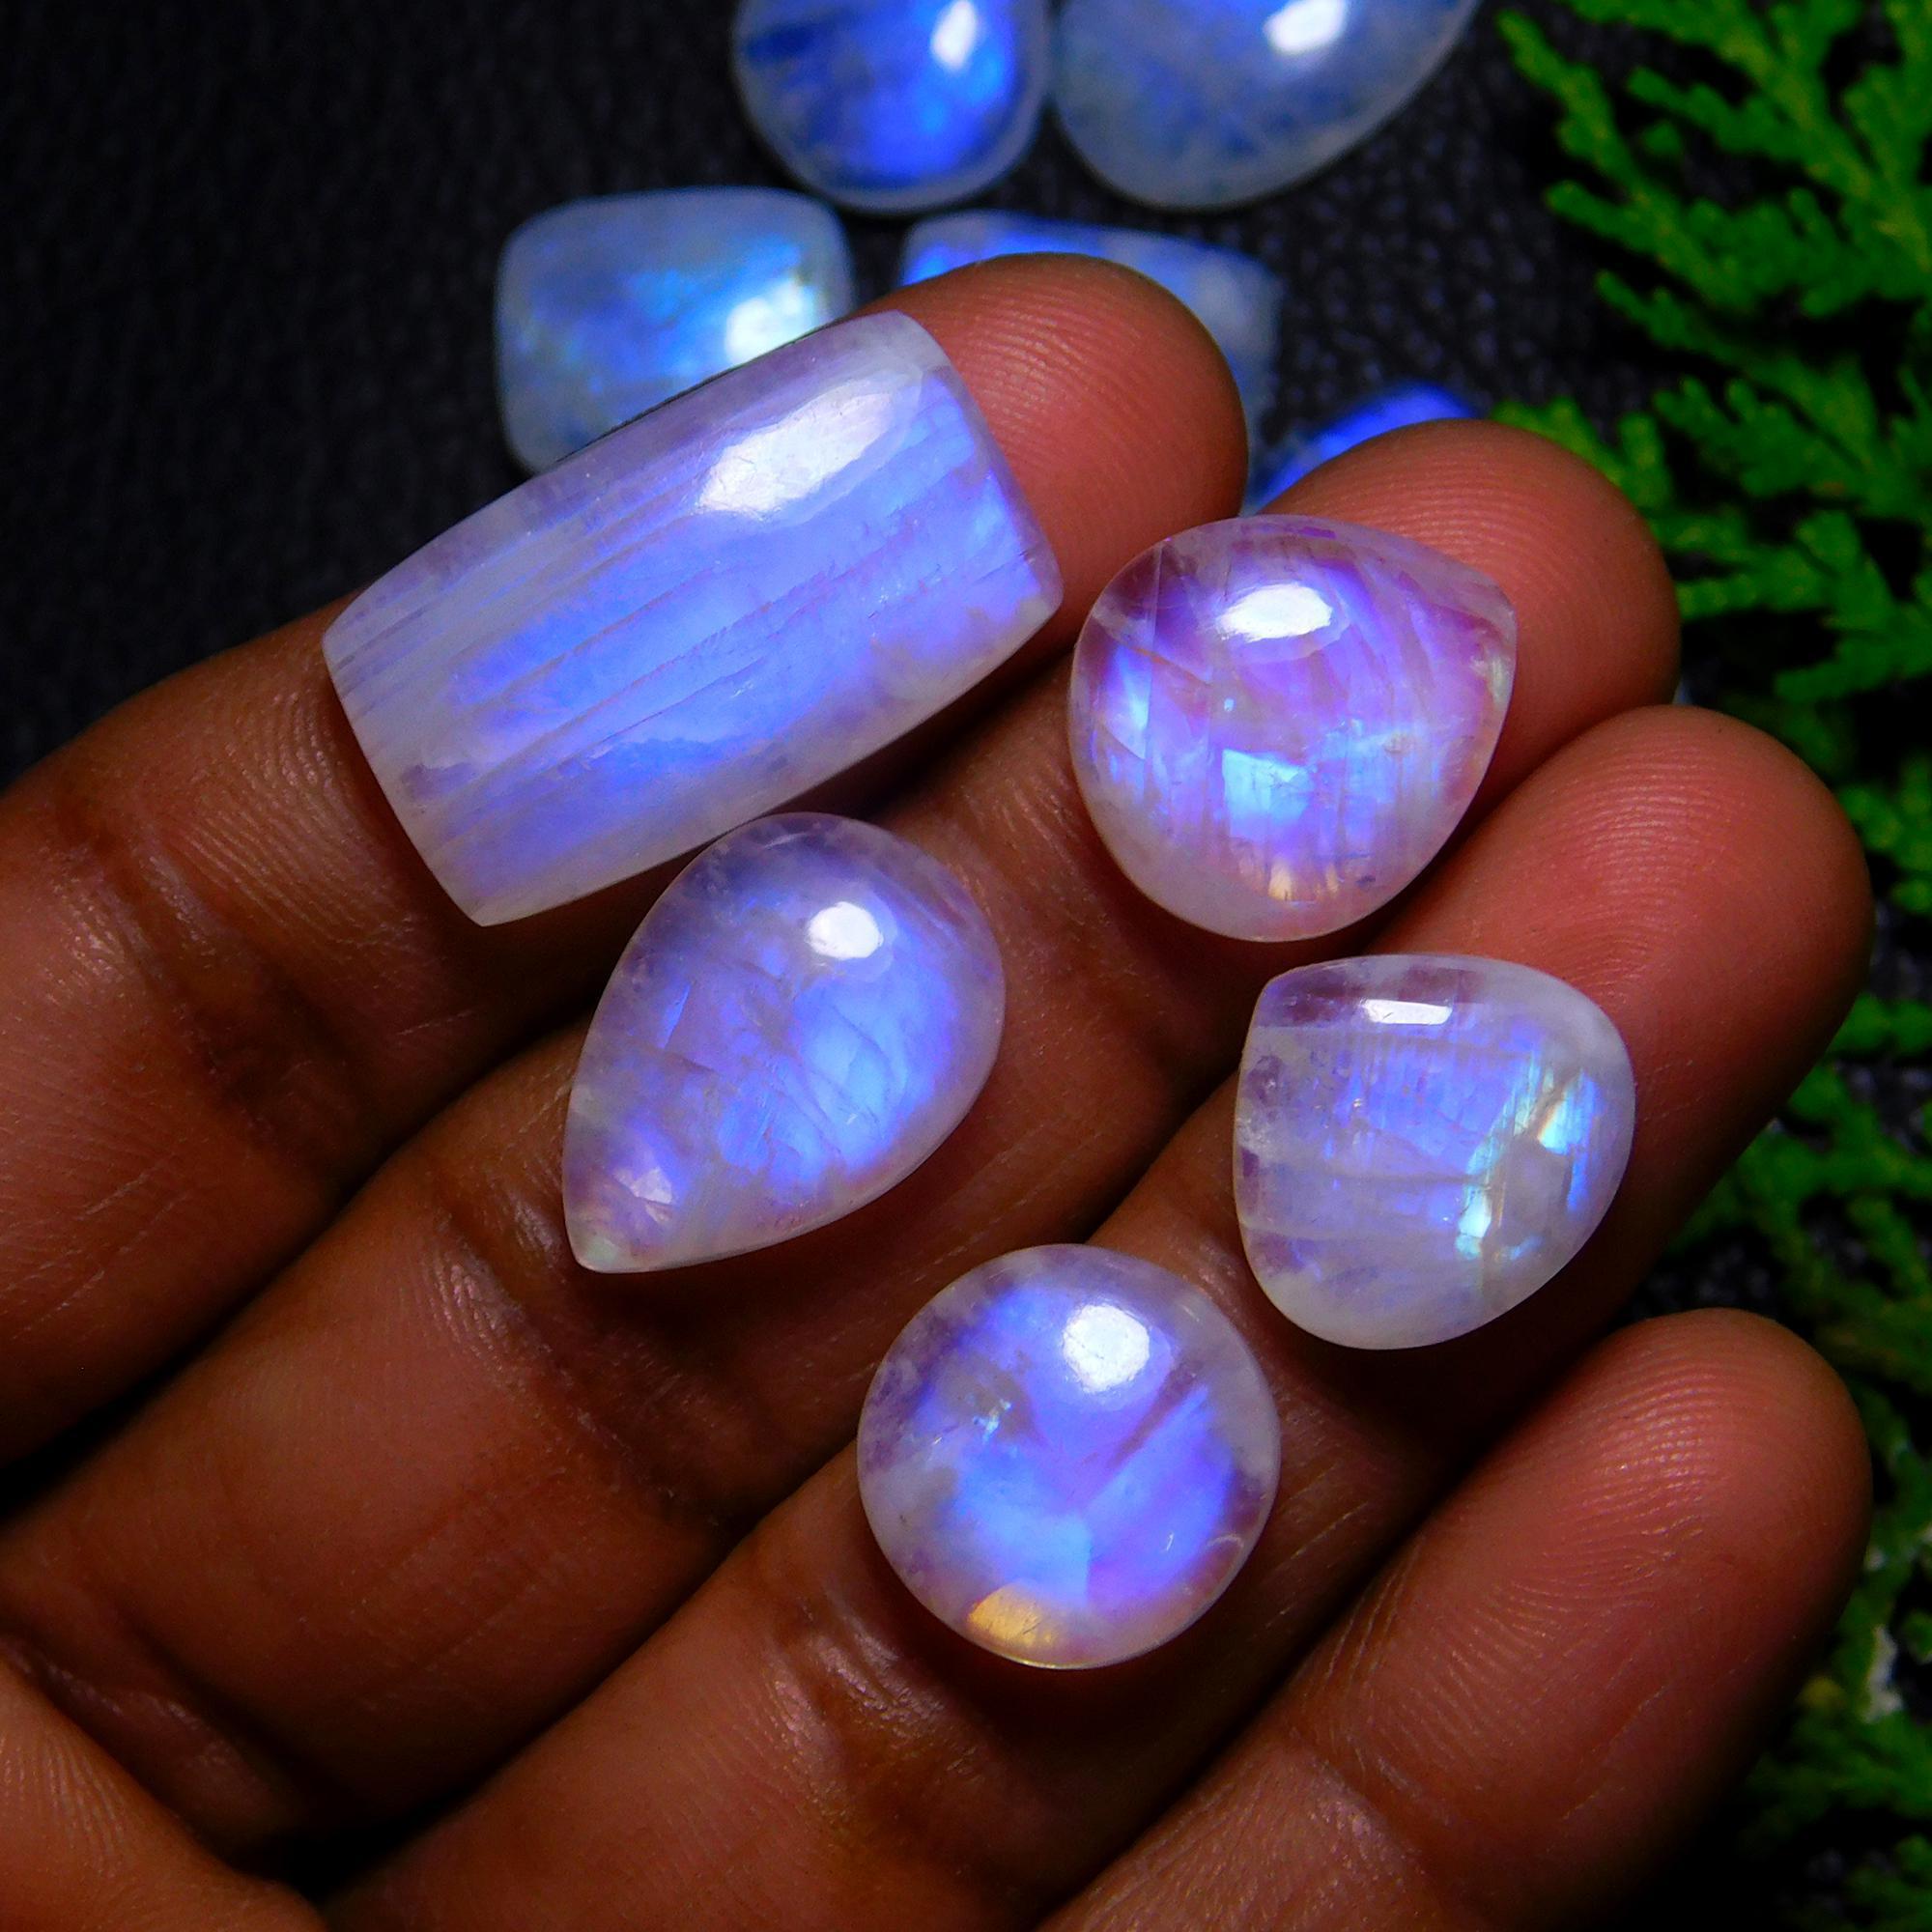 13Pcs 121Cts Natural Rainbow Moonstone Cabochon Blue Fire Loose Gemstone Crystal jewelry supplies wholesale lot gift for her Black Friday 24X14 12X12mm#9420